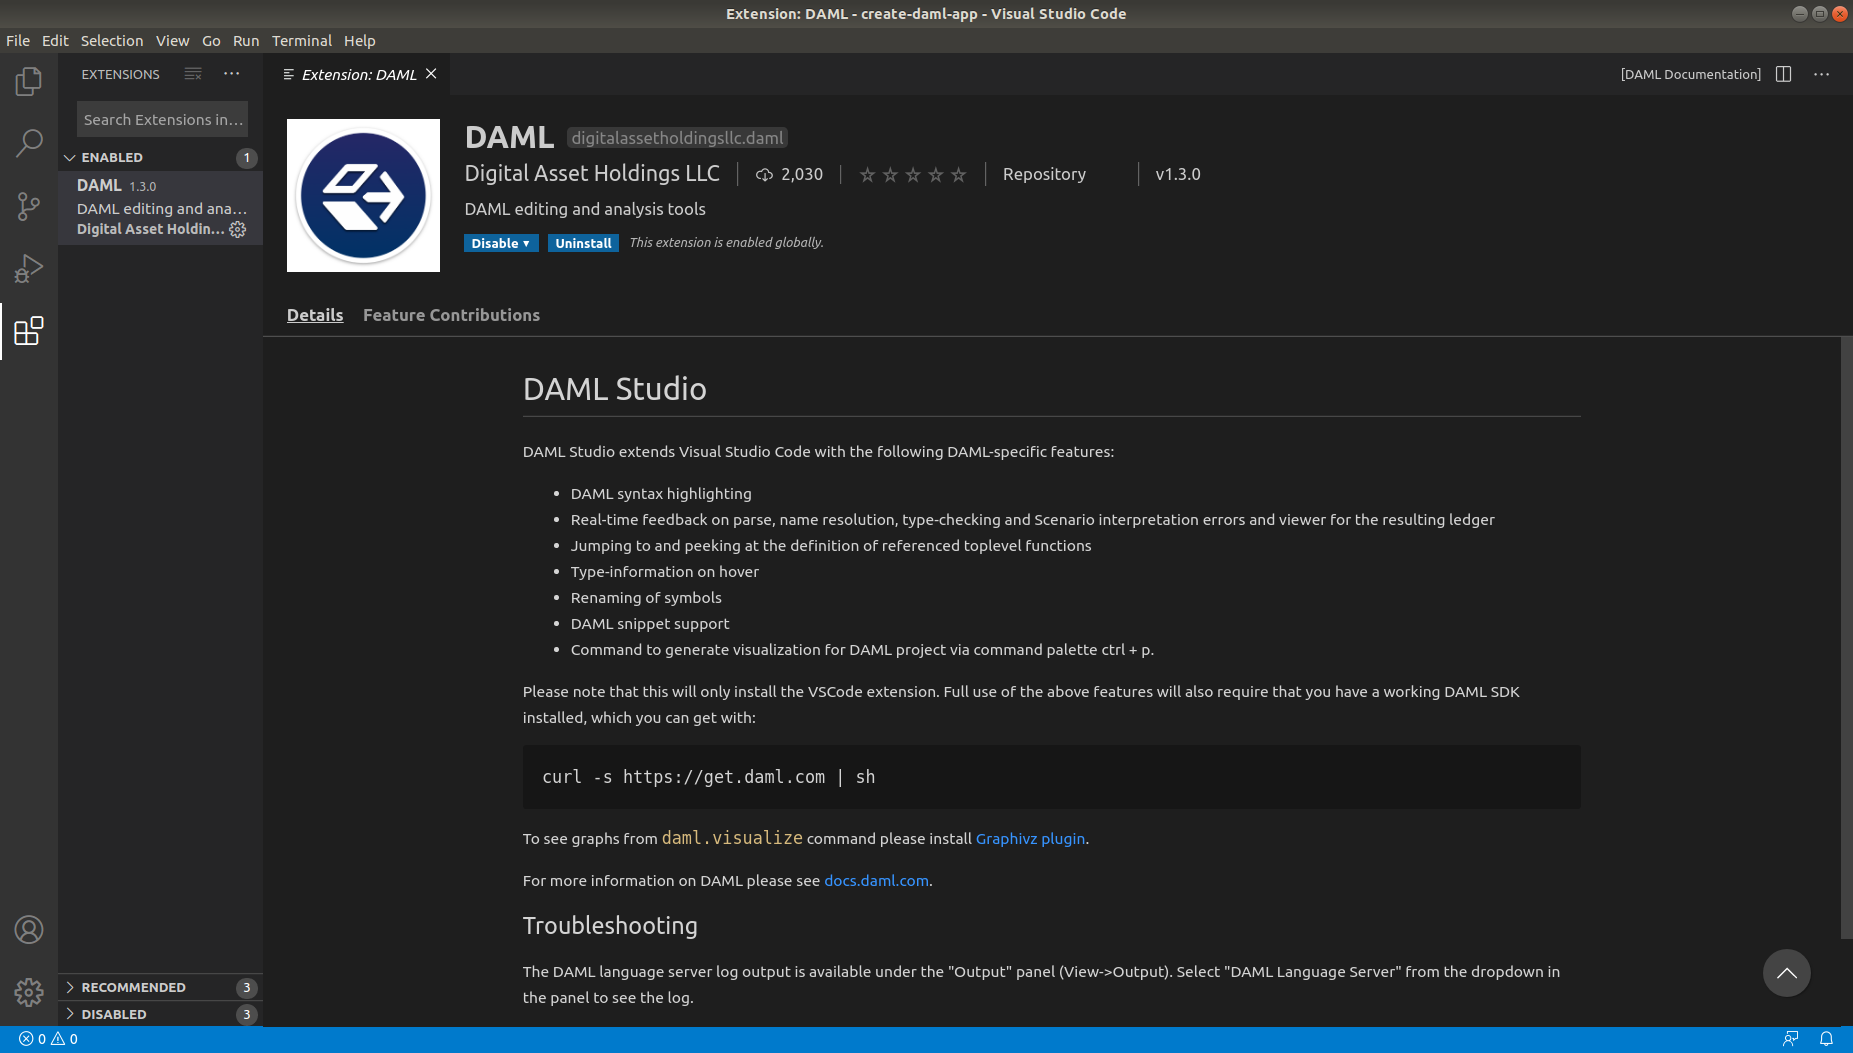 The Daml Studio extension page in Visual Studio Code, as shown when you click on Daml Studio in the extension.